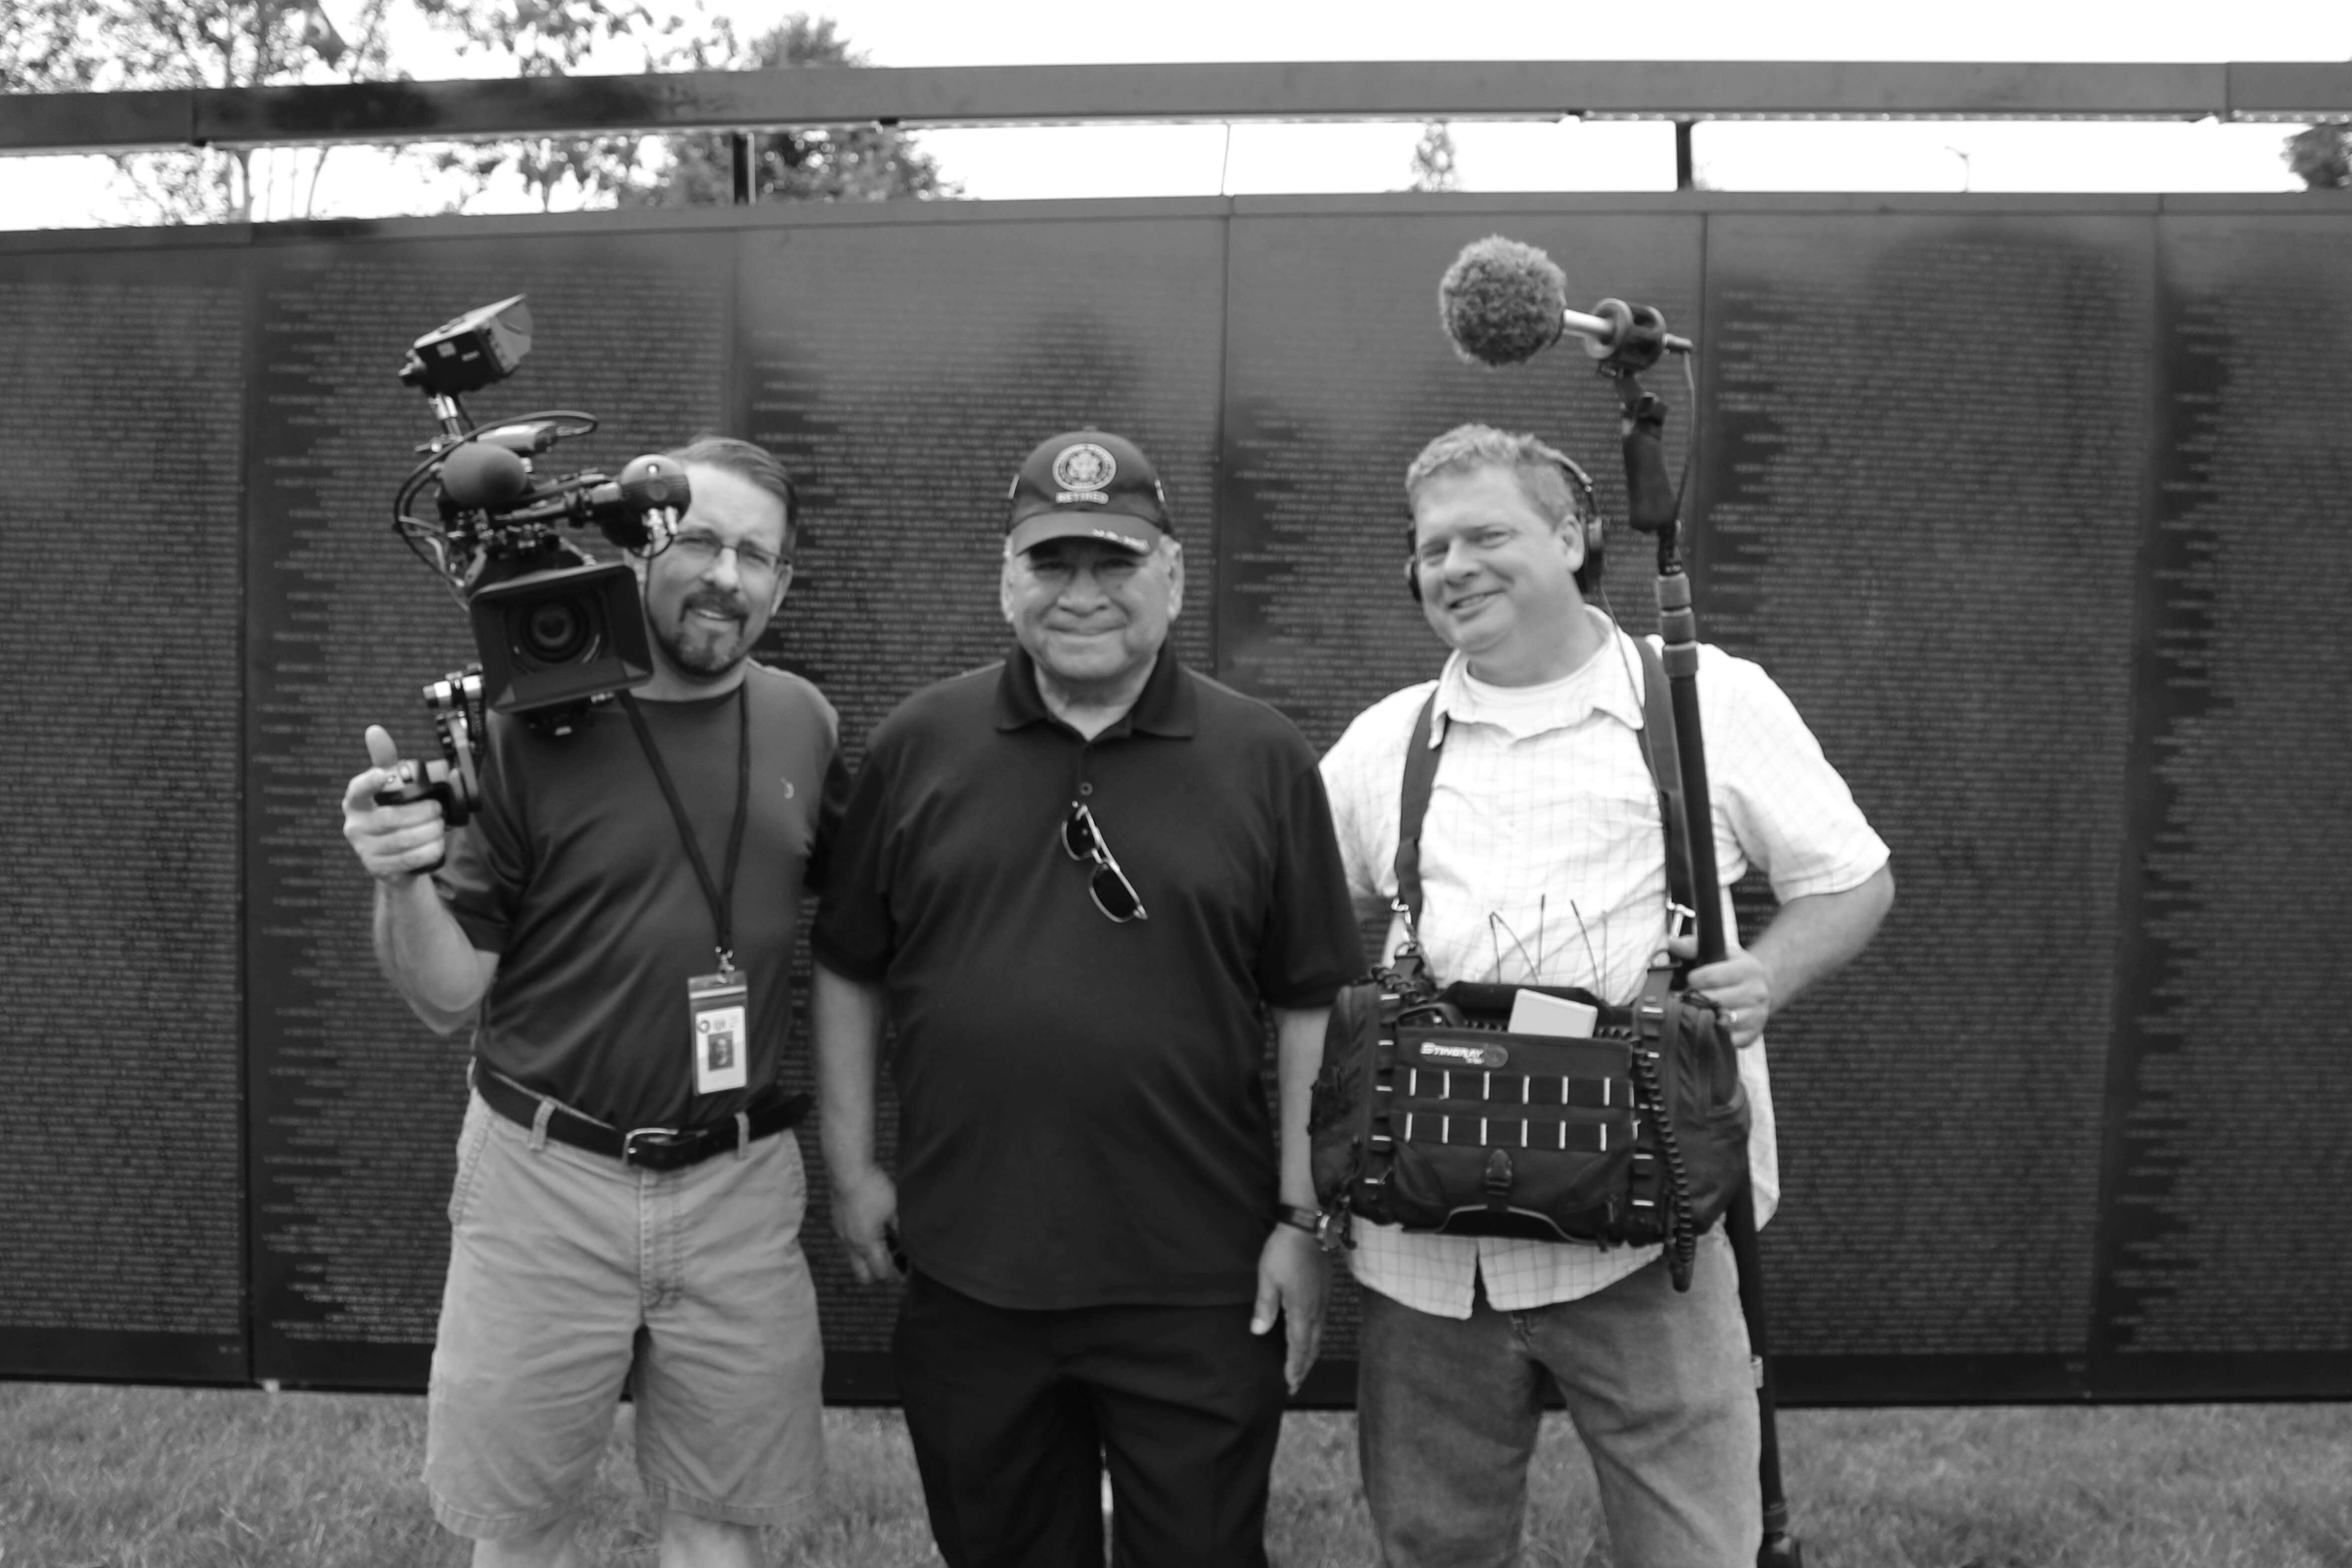 Modern day black and white photo of two middle aged men with camera and audio gear flanking an older gentleman dressed in black with a Vietnam veteran cap on. They are standing in front of a scaled replica of the Vietnam Wall.